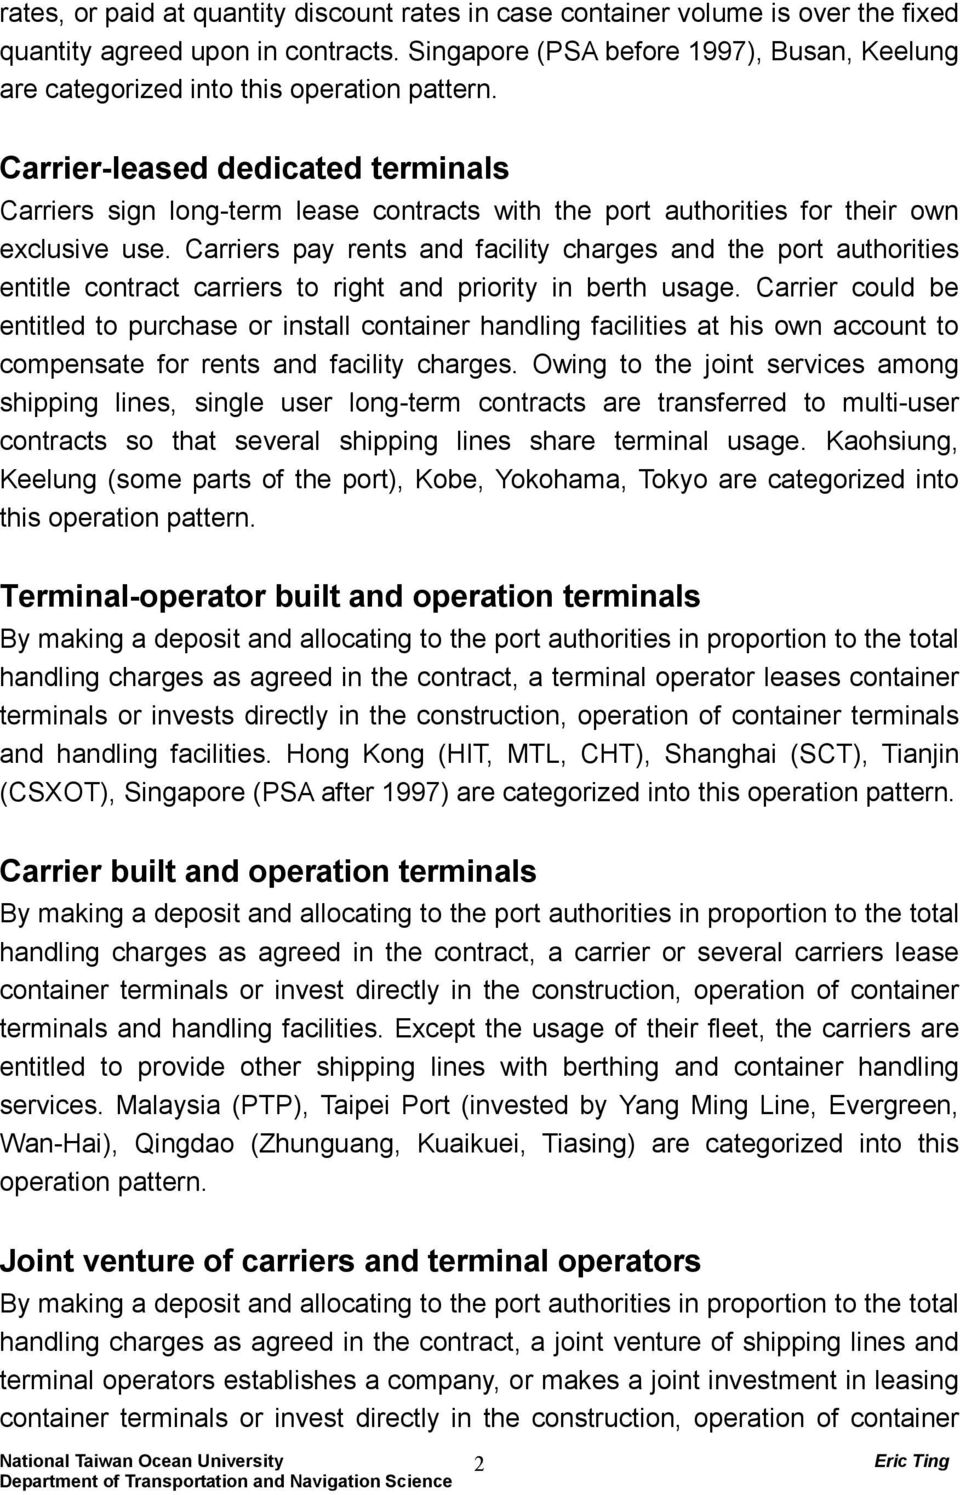 Carrier-leased dedicated terminals Carriers sign long-term lease contracts with the port authorities for their own exclusive use.